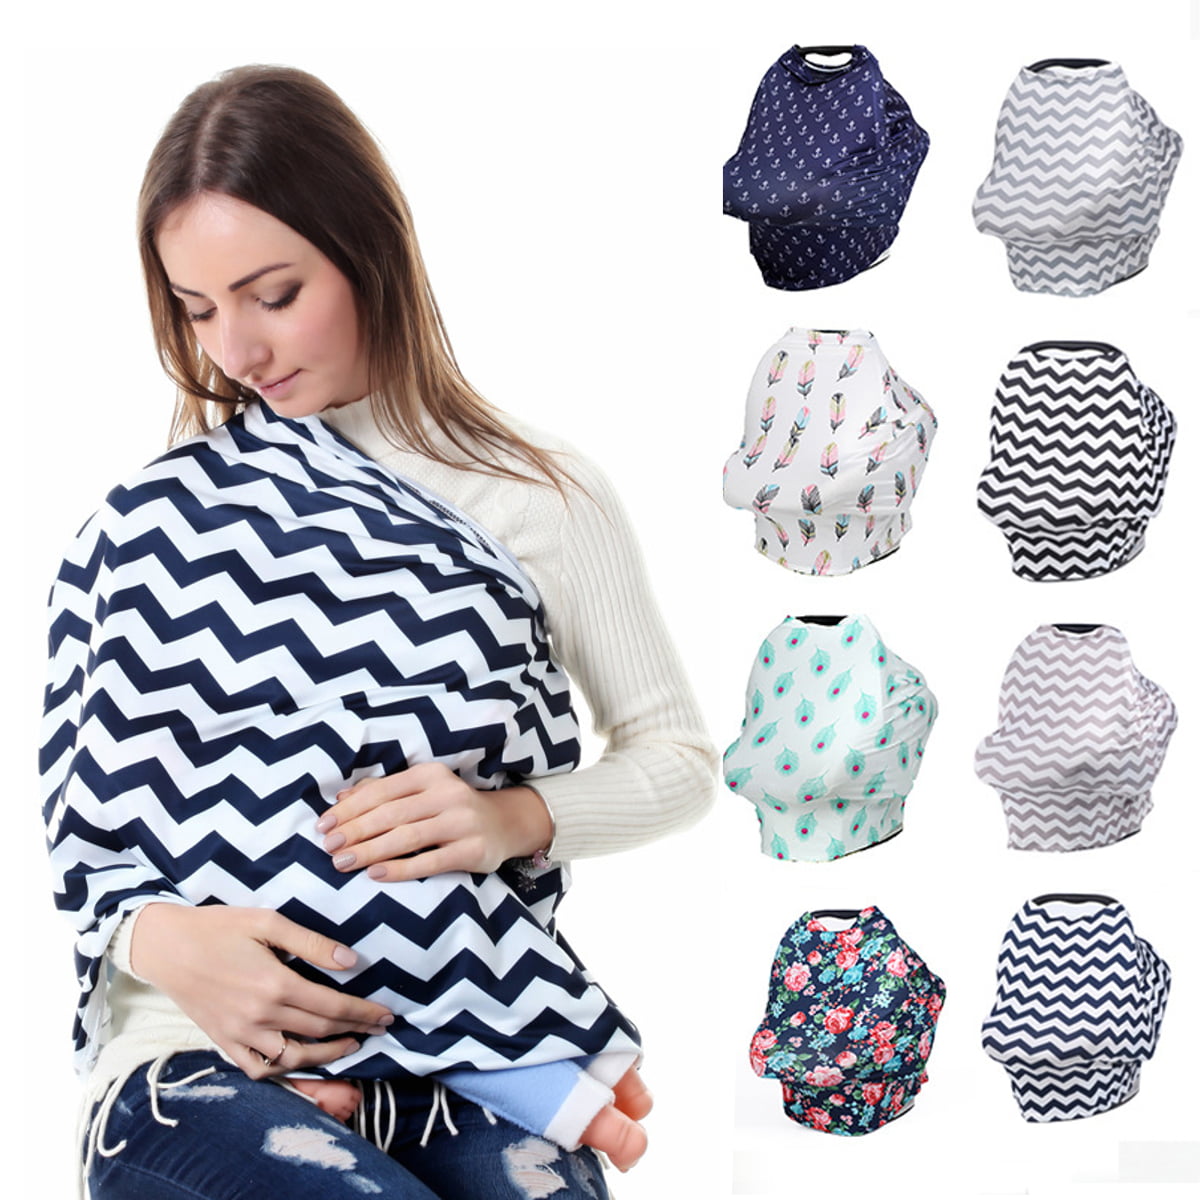 Cotton Breastfeeding Covers & Scarves Multi-Use Nursing Cover and Infinity Scarf Kaa Arrows Baby Car Seat & Shoppin Stretchy Car Seat Cover & Canopy Cart and Highchair Covering 